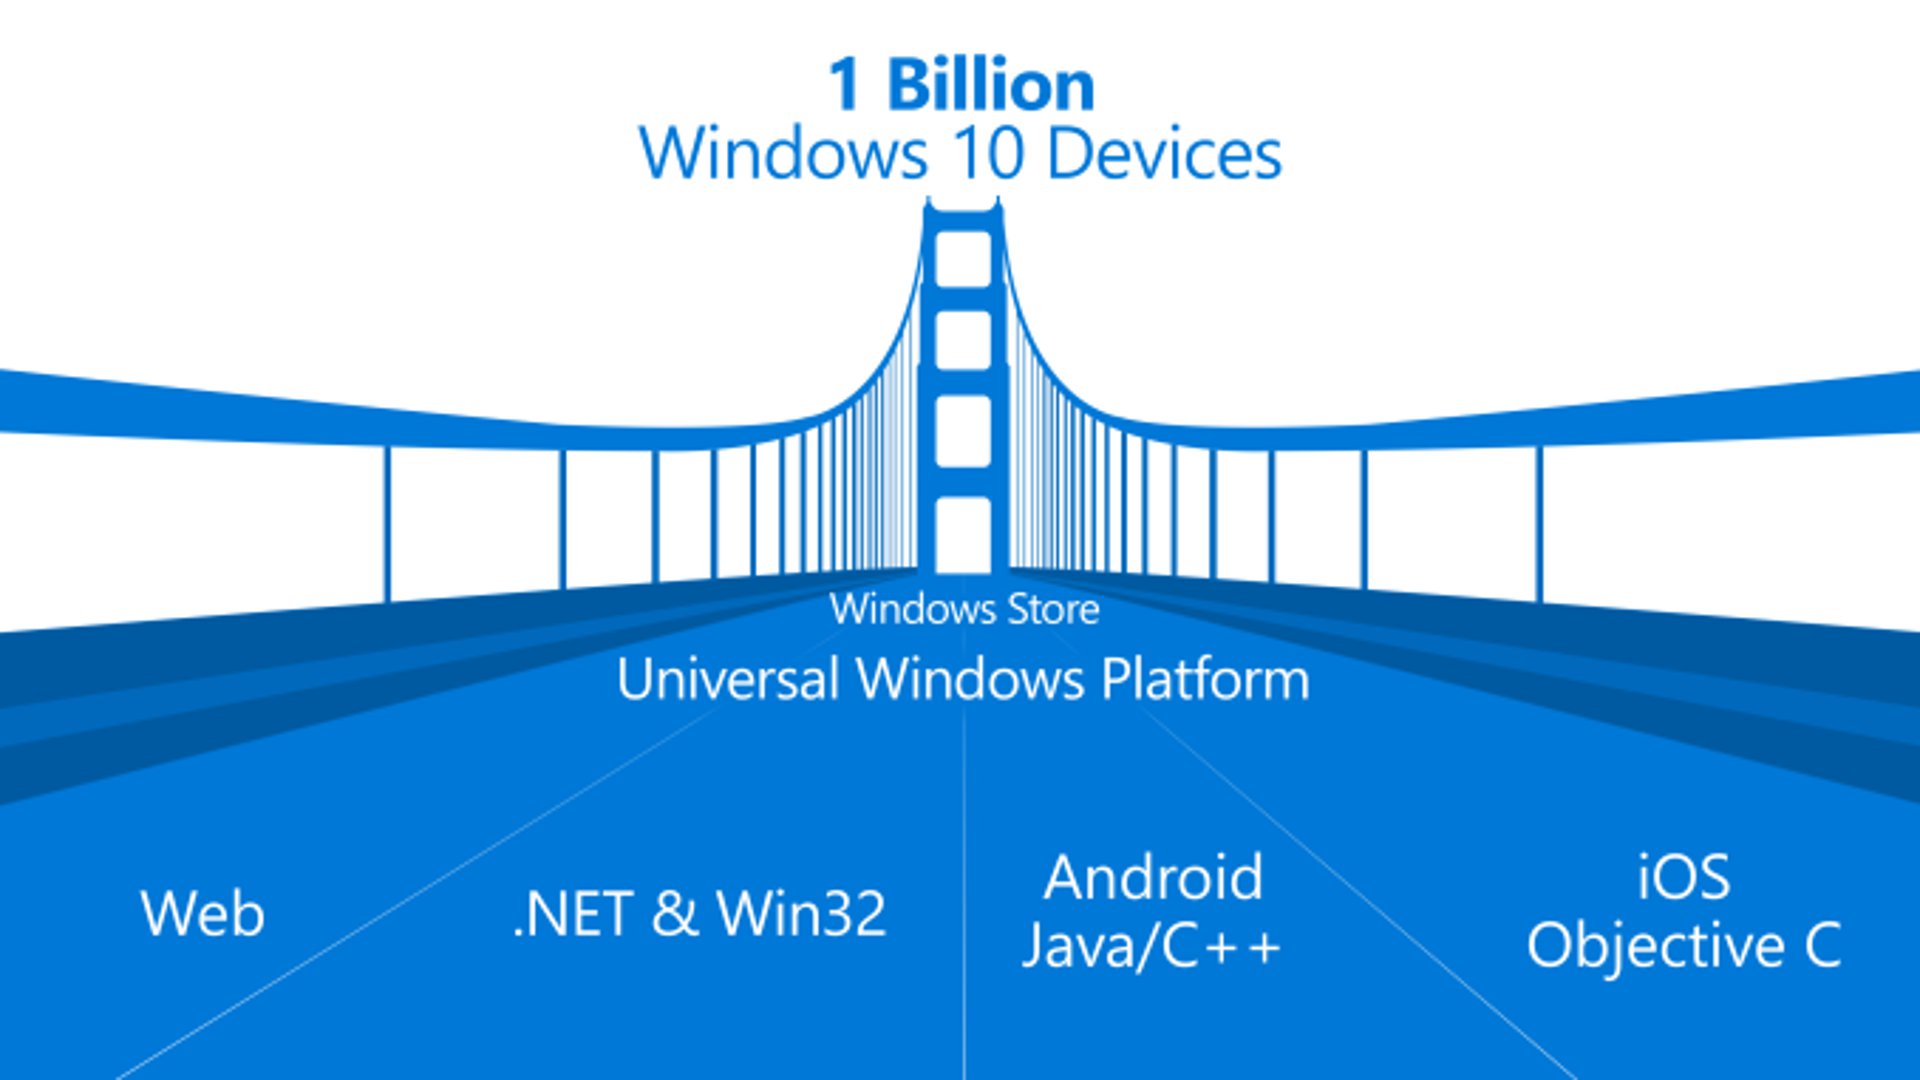 Microsoft Build 2015 - Windows 10 Support For Android And iOS Apps